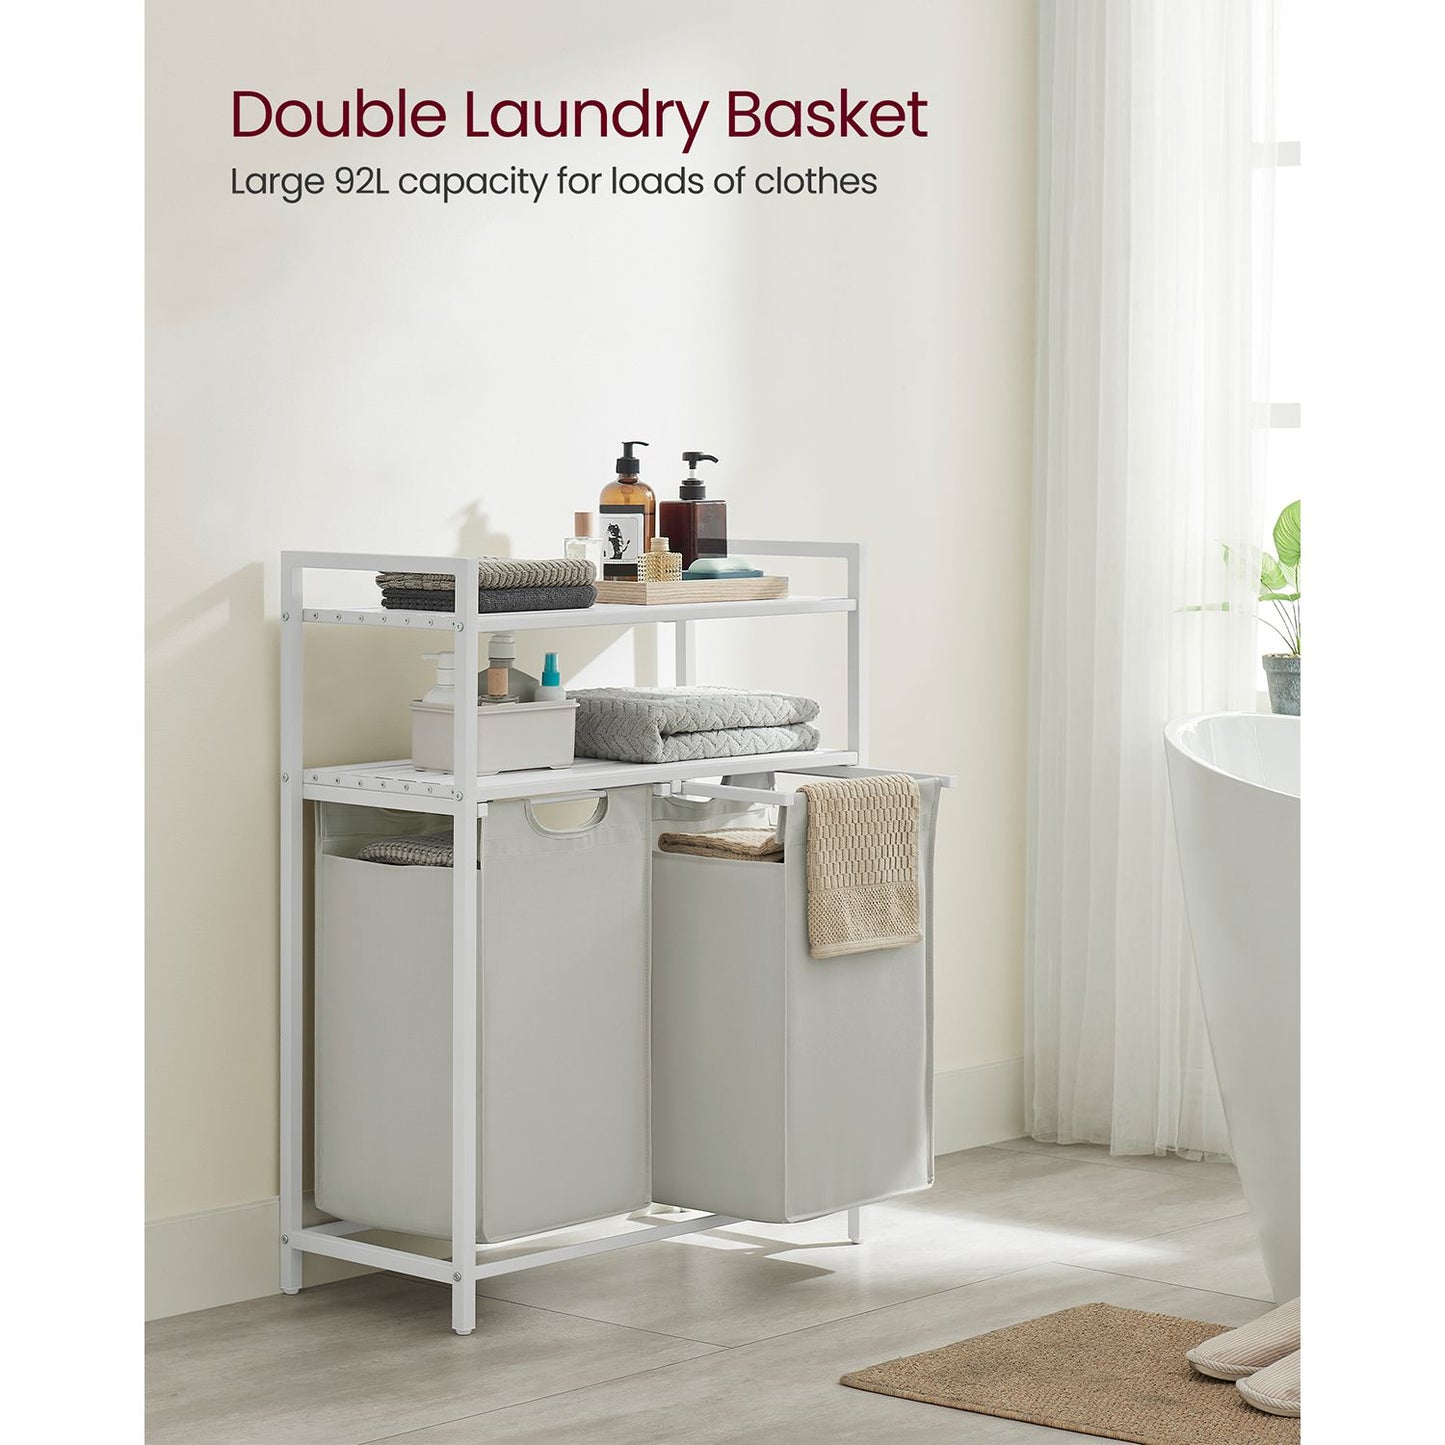 Laundry Basket, Laundry Hamper, Laundry Sorter with 2 Pull-Out and Removable Bags, 2 Shelves, 46L Capacity per Bag, 3